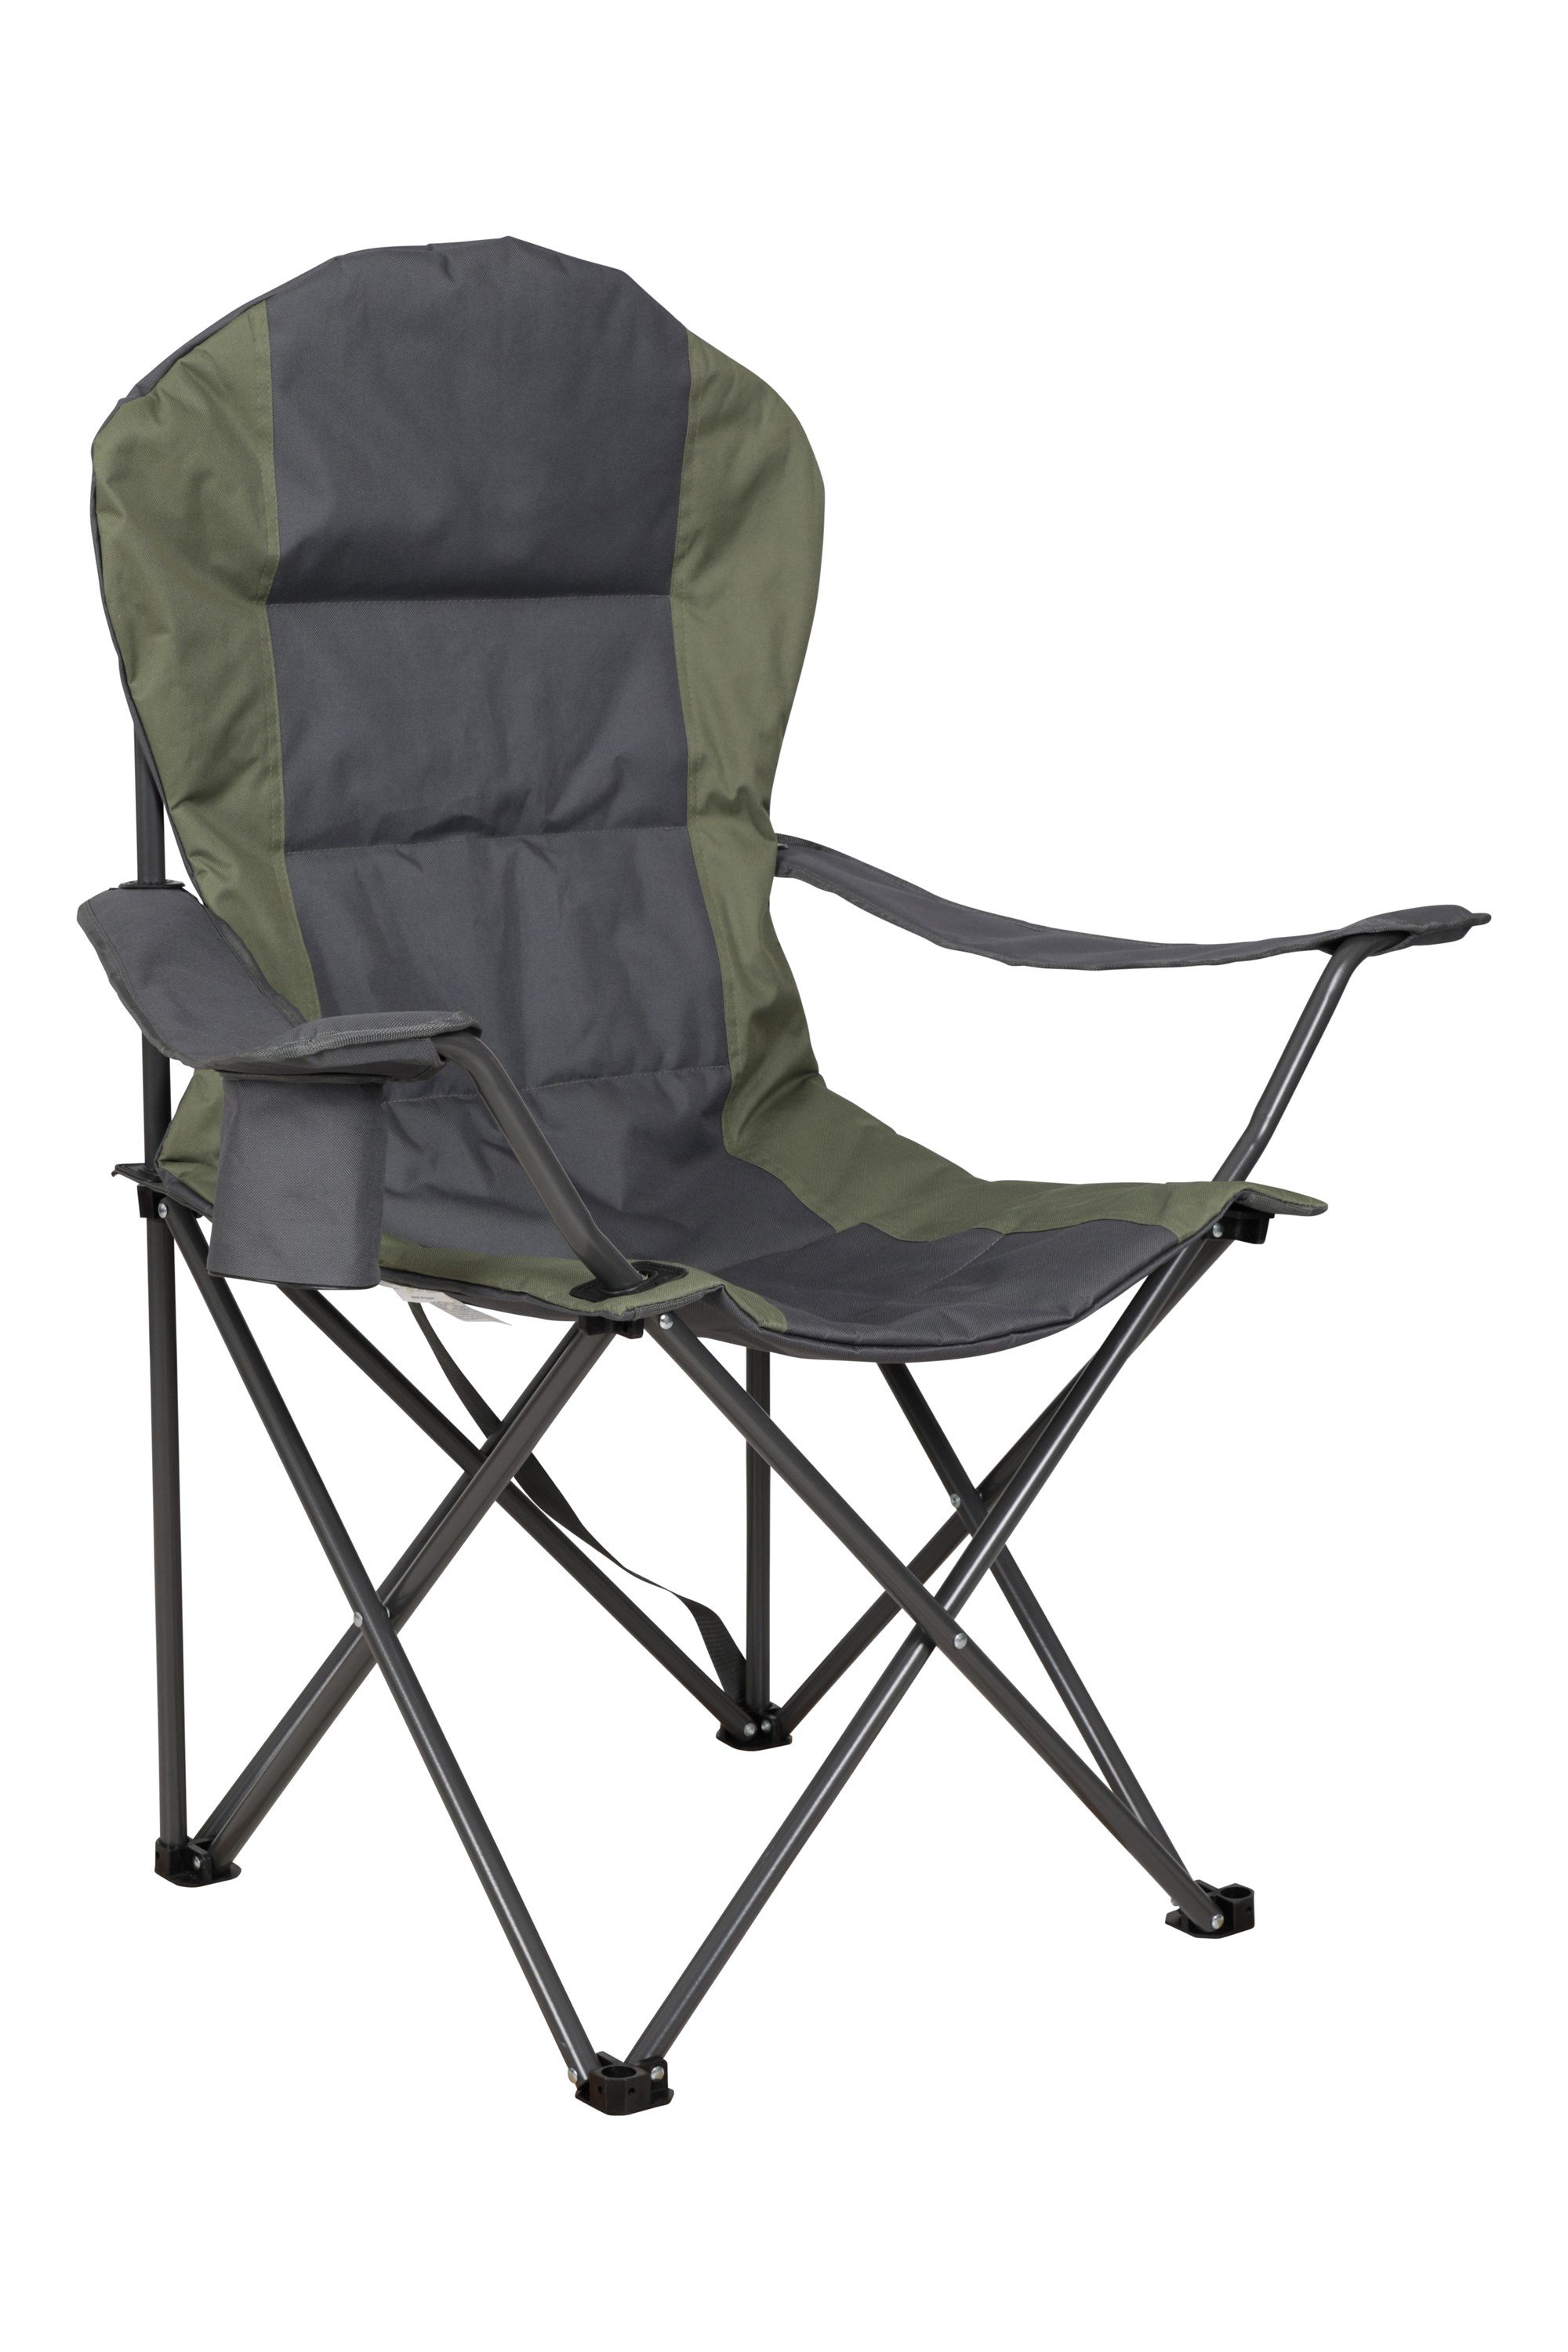 Deluxe Camping Chair - Green